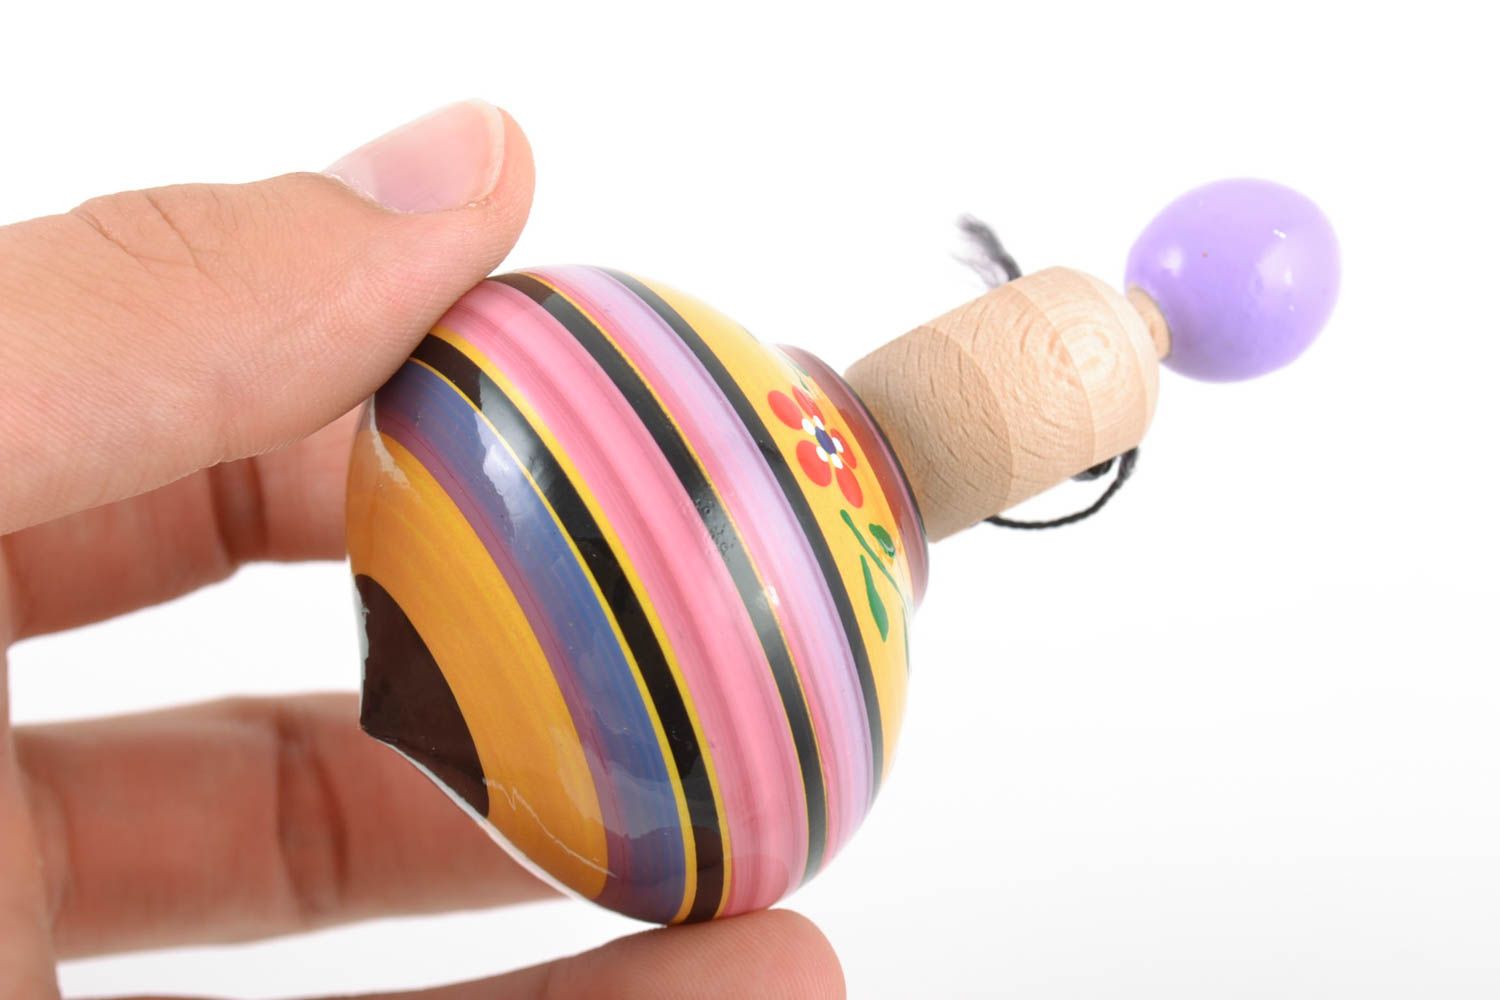 Children's handmade painted wooden spinning top educational toy photo 2